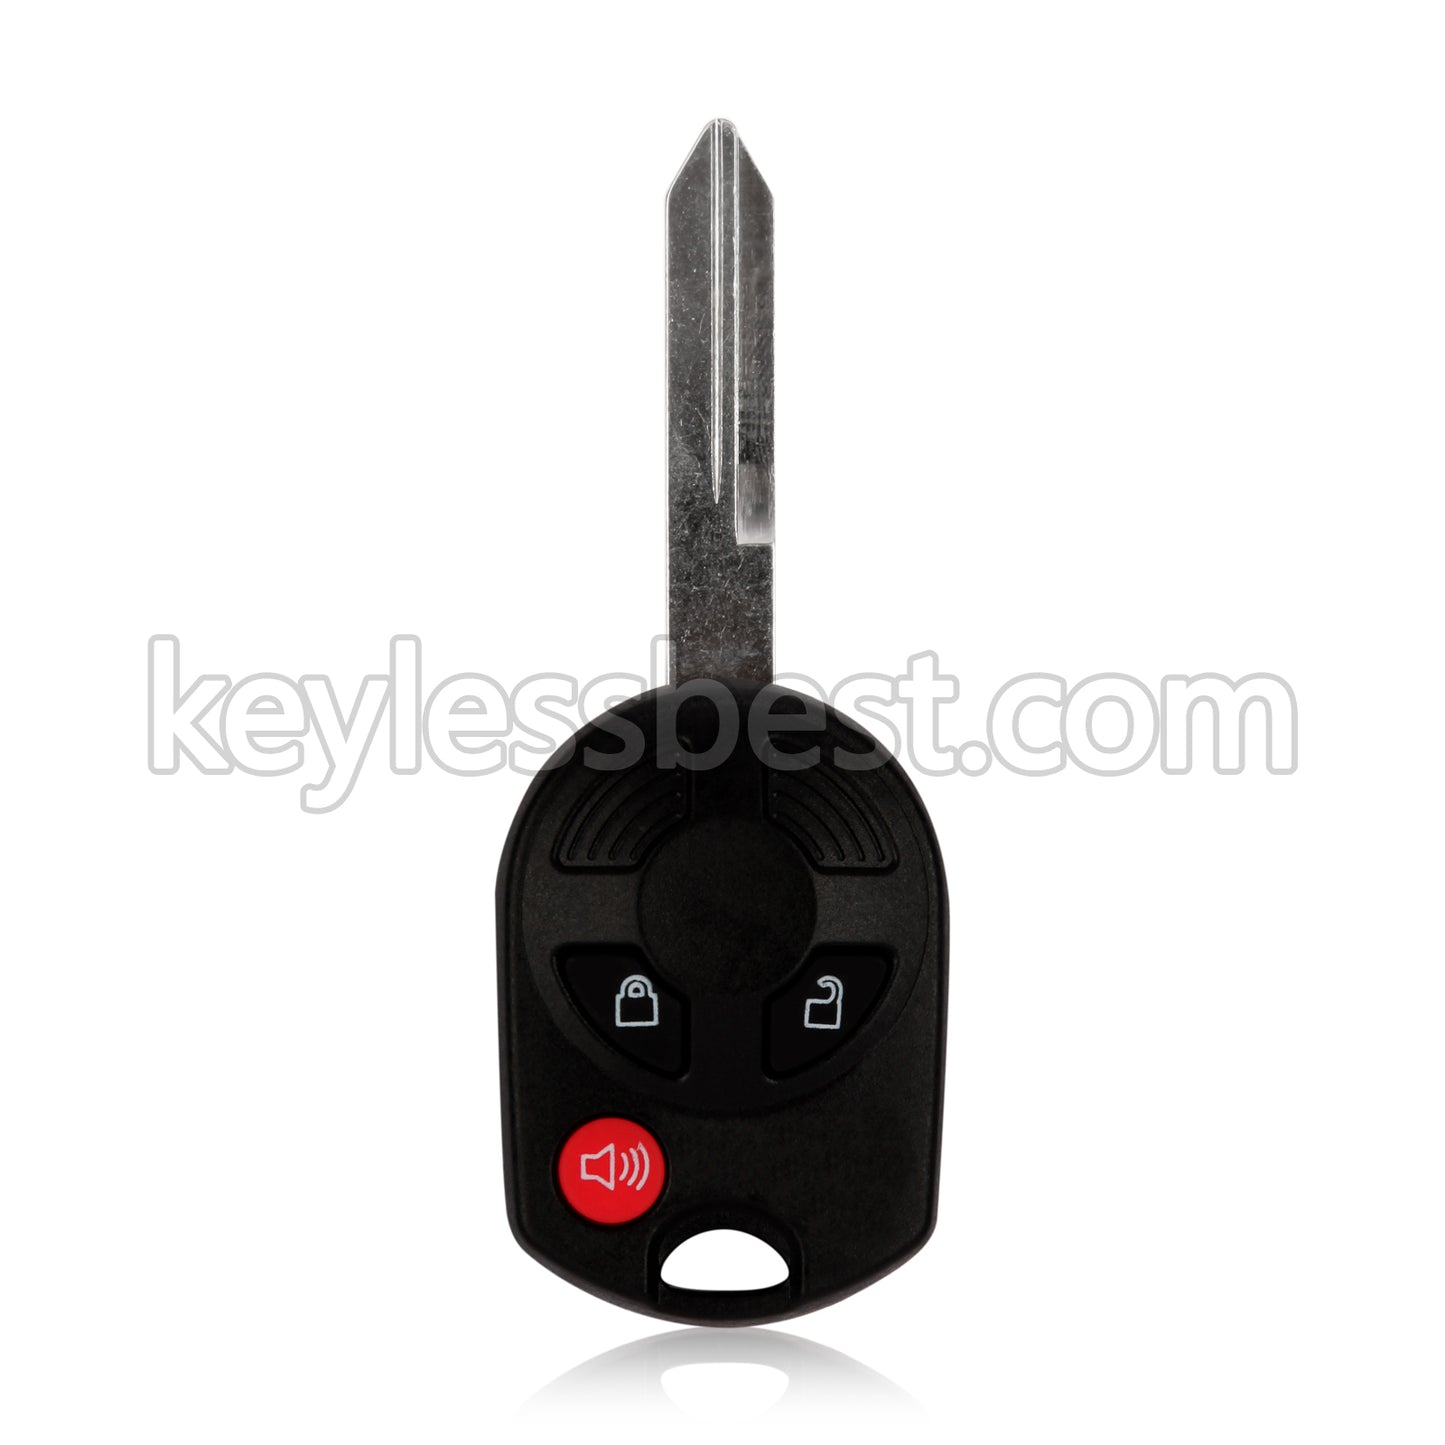 2000-2018 Ford Lincoln Mazda Mercury / 3 Buttons Remote Key / OUCD6000022 / 315MHz